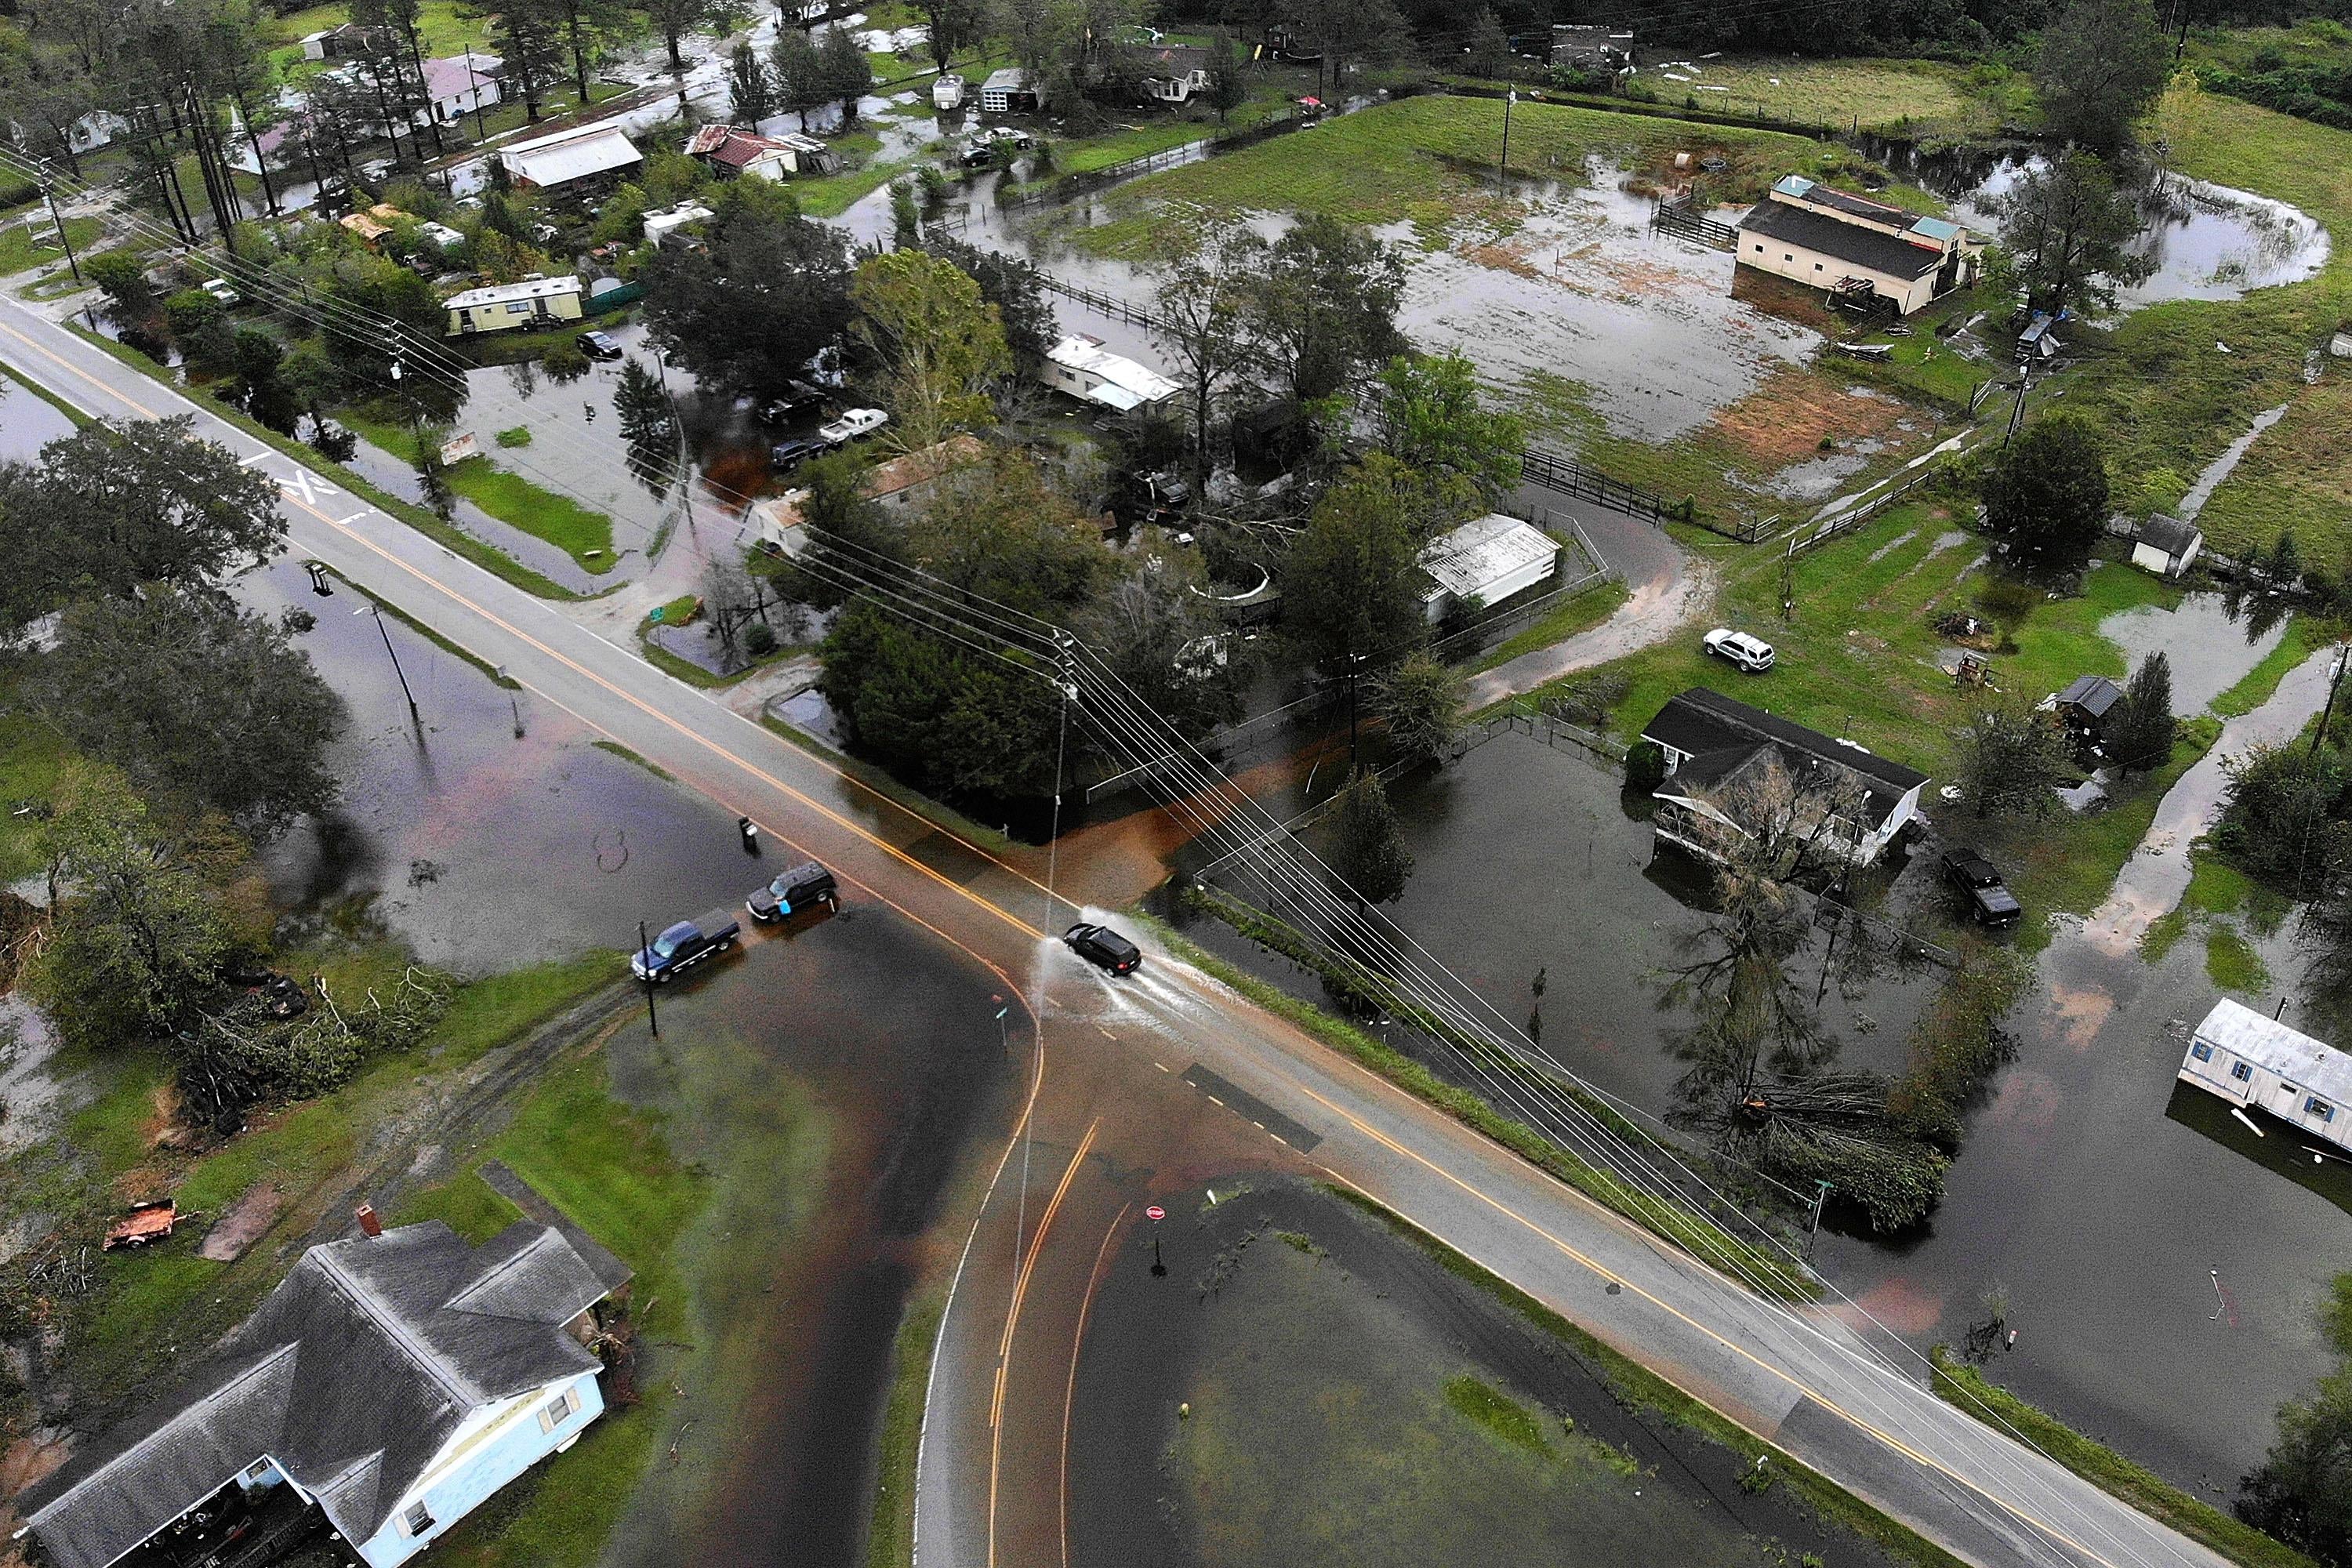 An aerial image of flooded roads and houses.